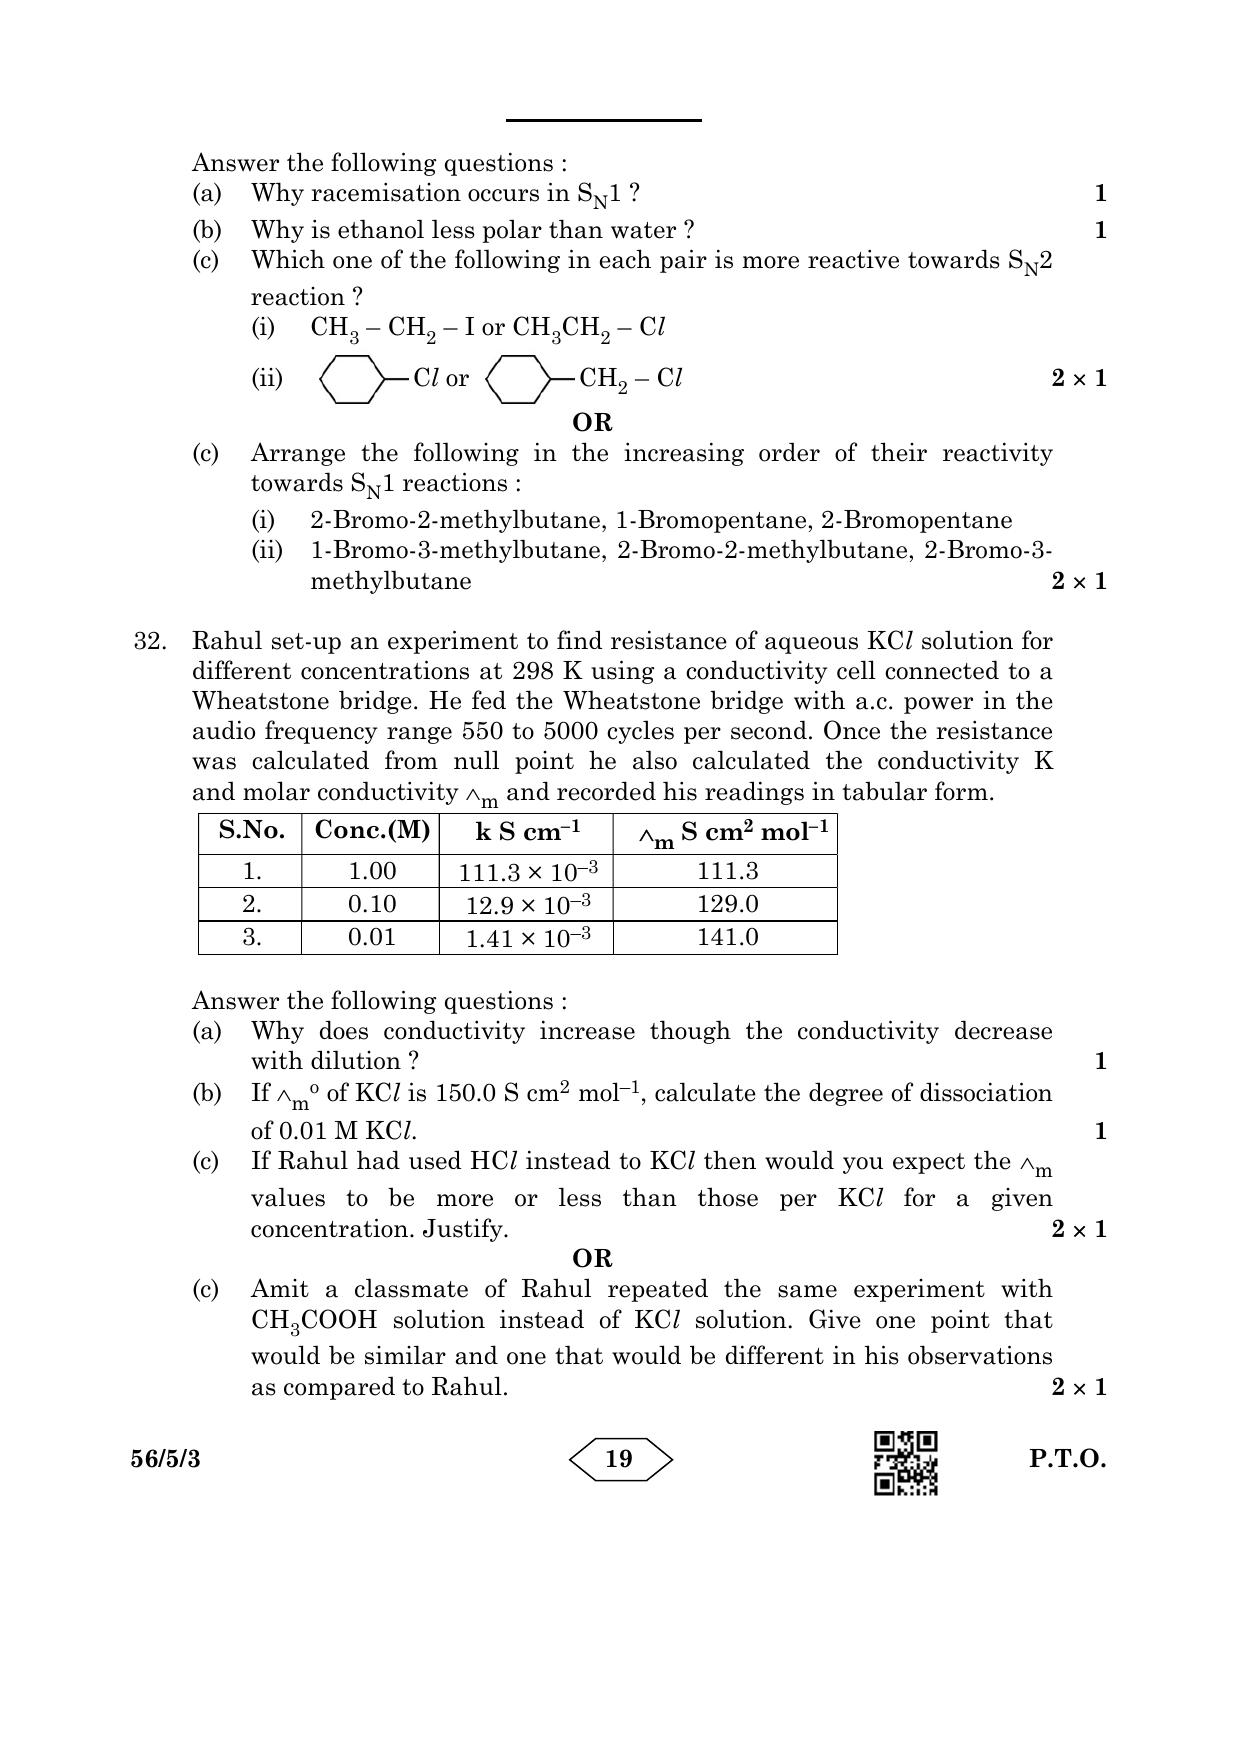 CBSE Class 12 56-5-3 Chemistry 2023 Question Paper - Page 19